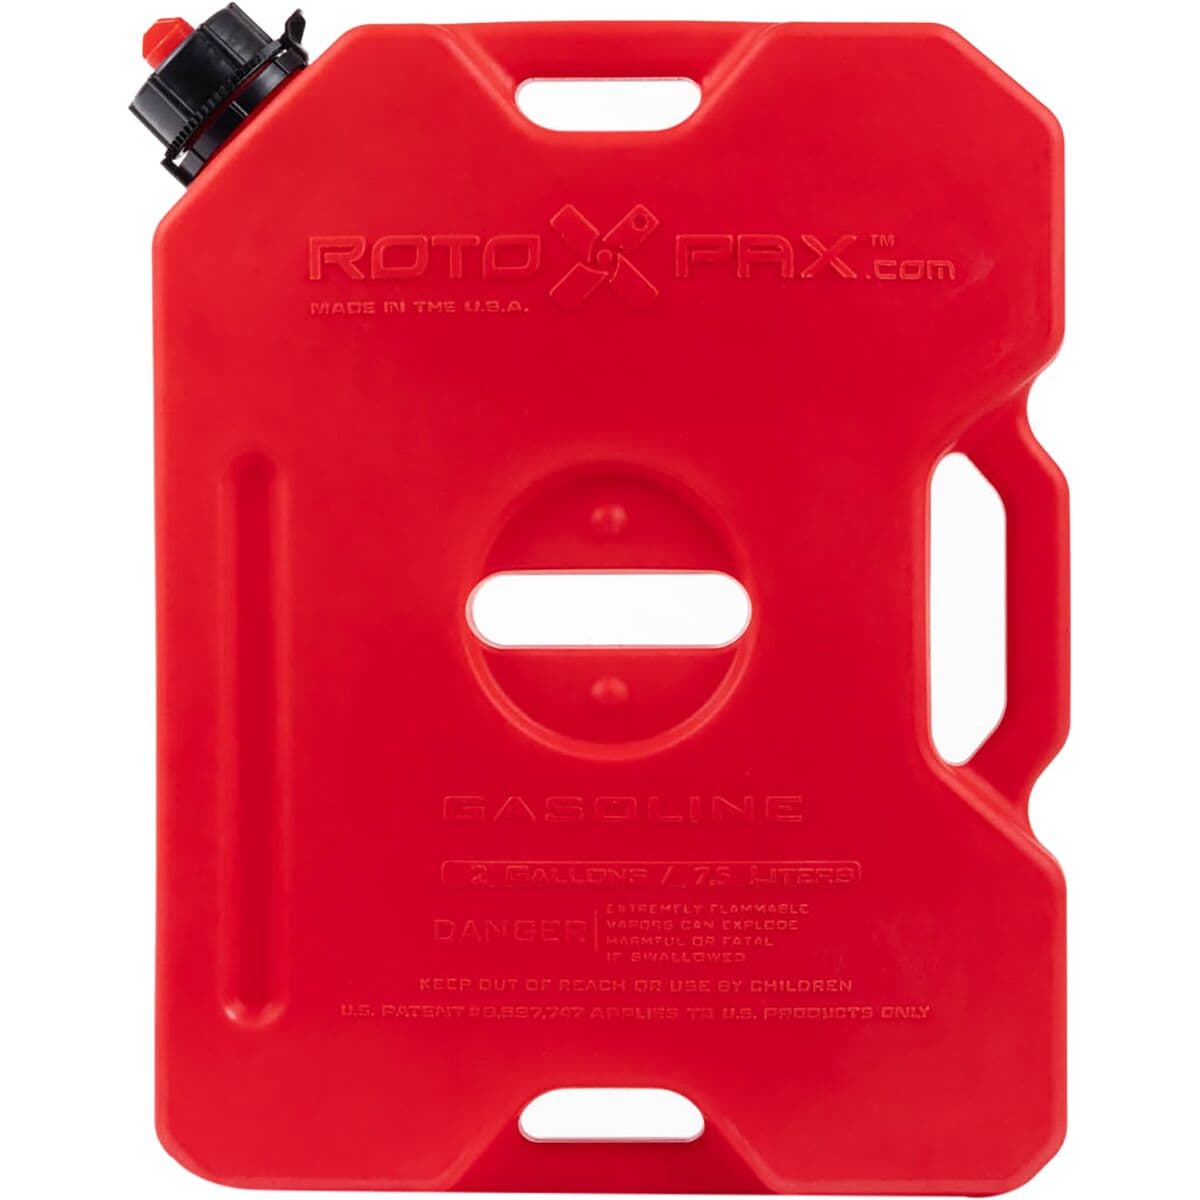 RotoPaX Fuel Container 2 Gal